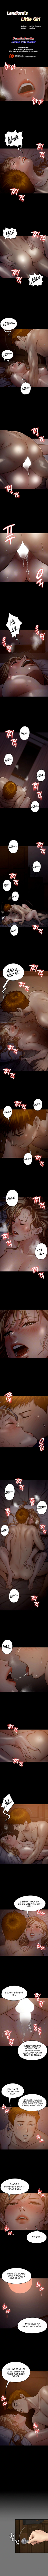 Panel Image 1 for chapter 104 of manhwa Queen Bee on read.oppai.stream